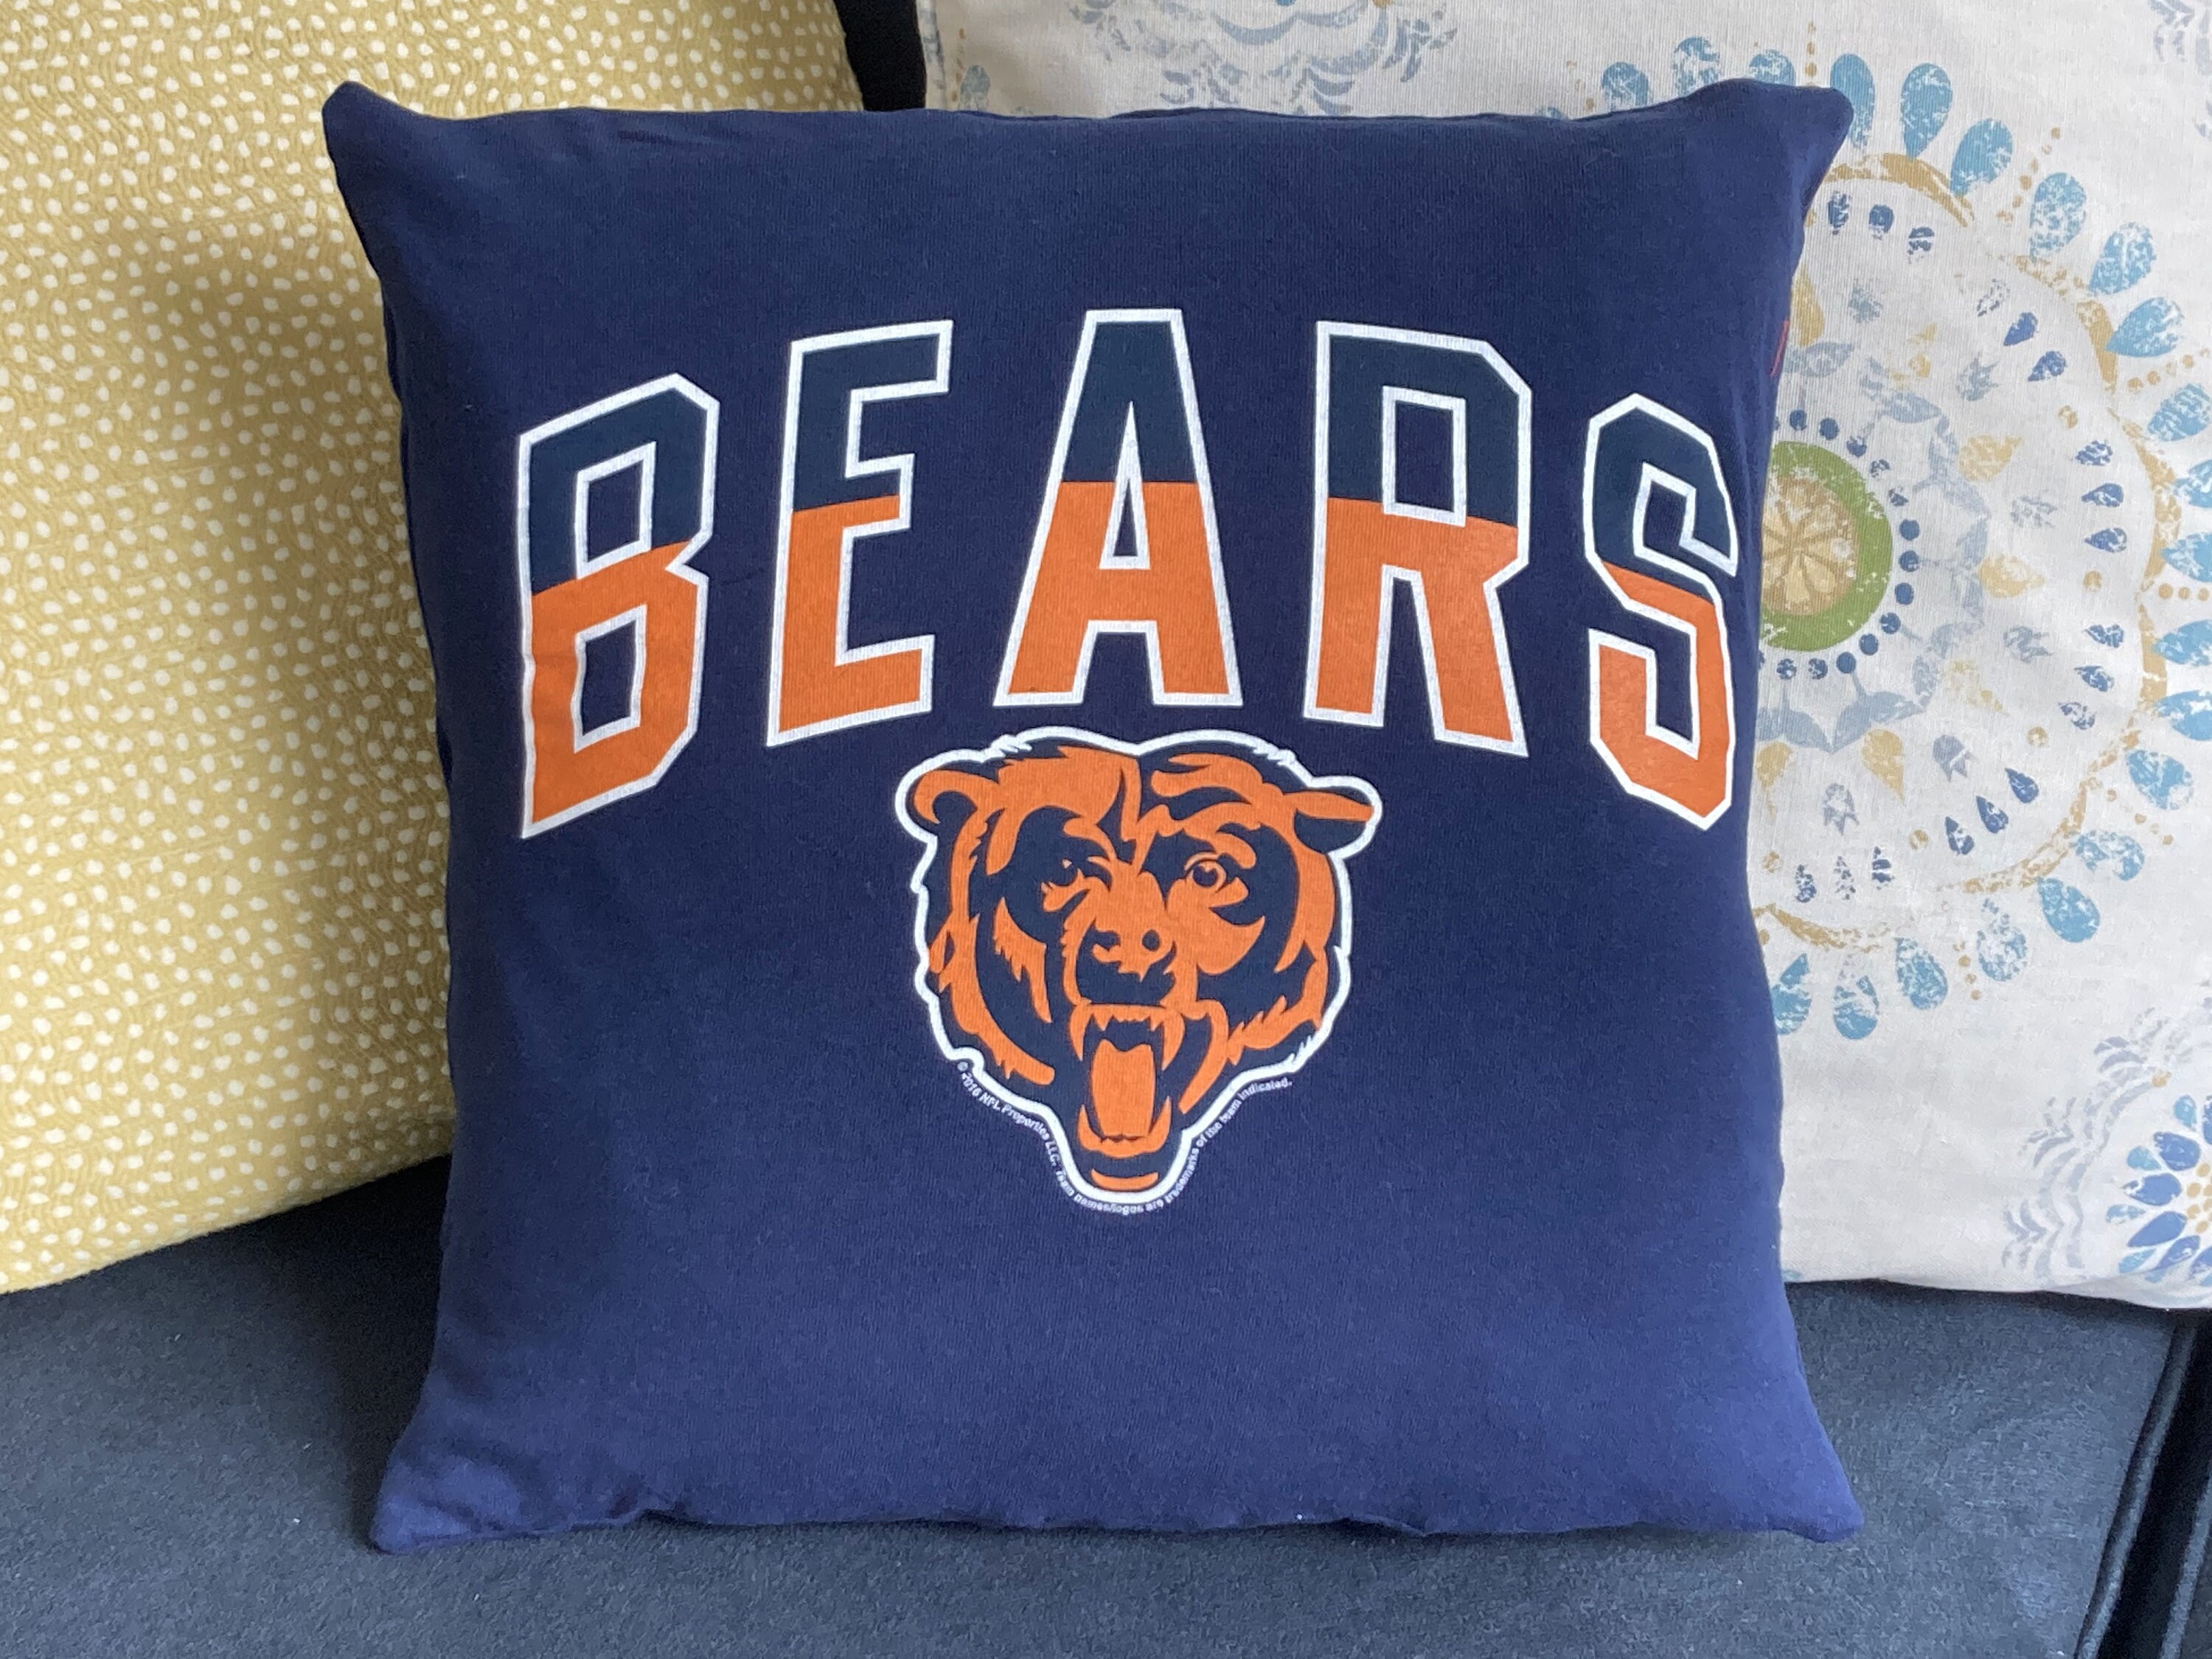 Chicago Bears Football Pillow cases vintage T shirt pillow covers housewarming gift